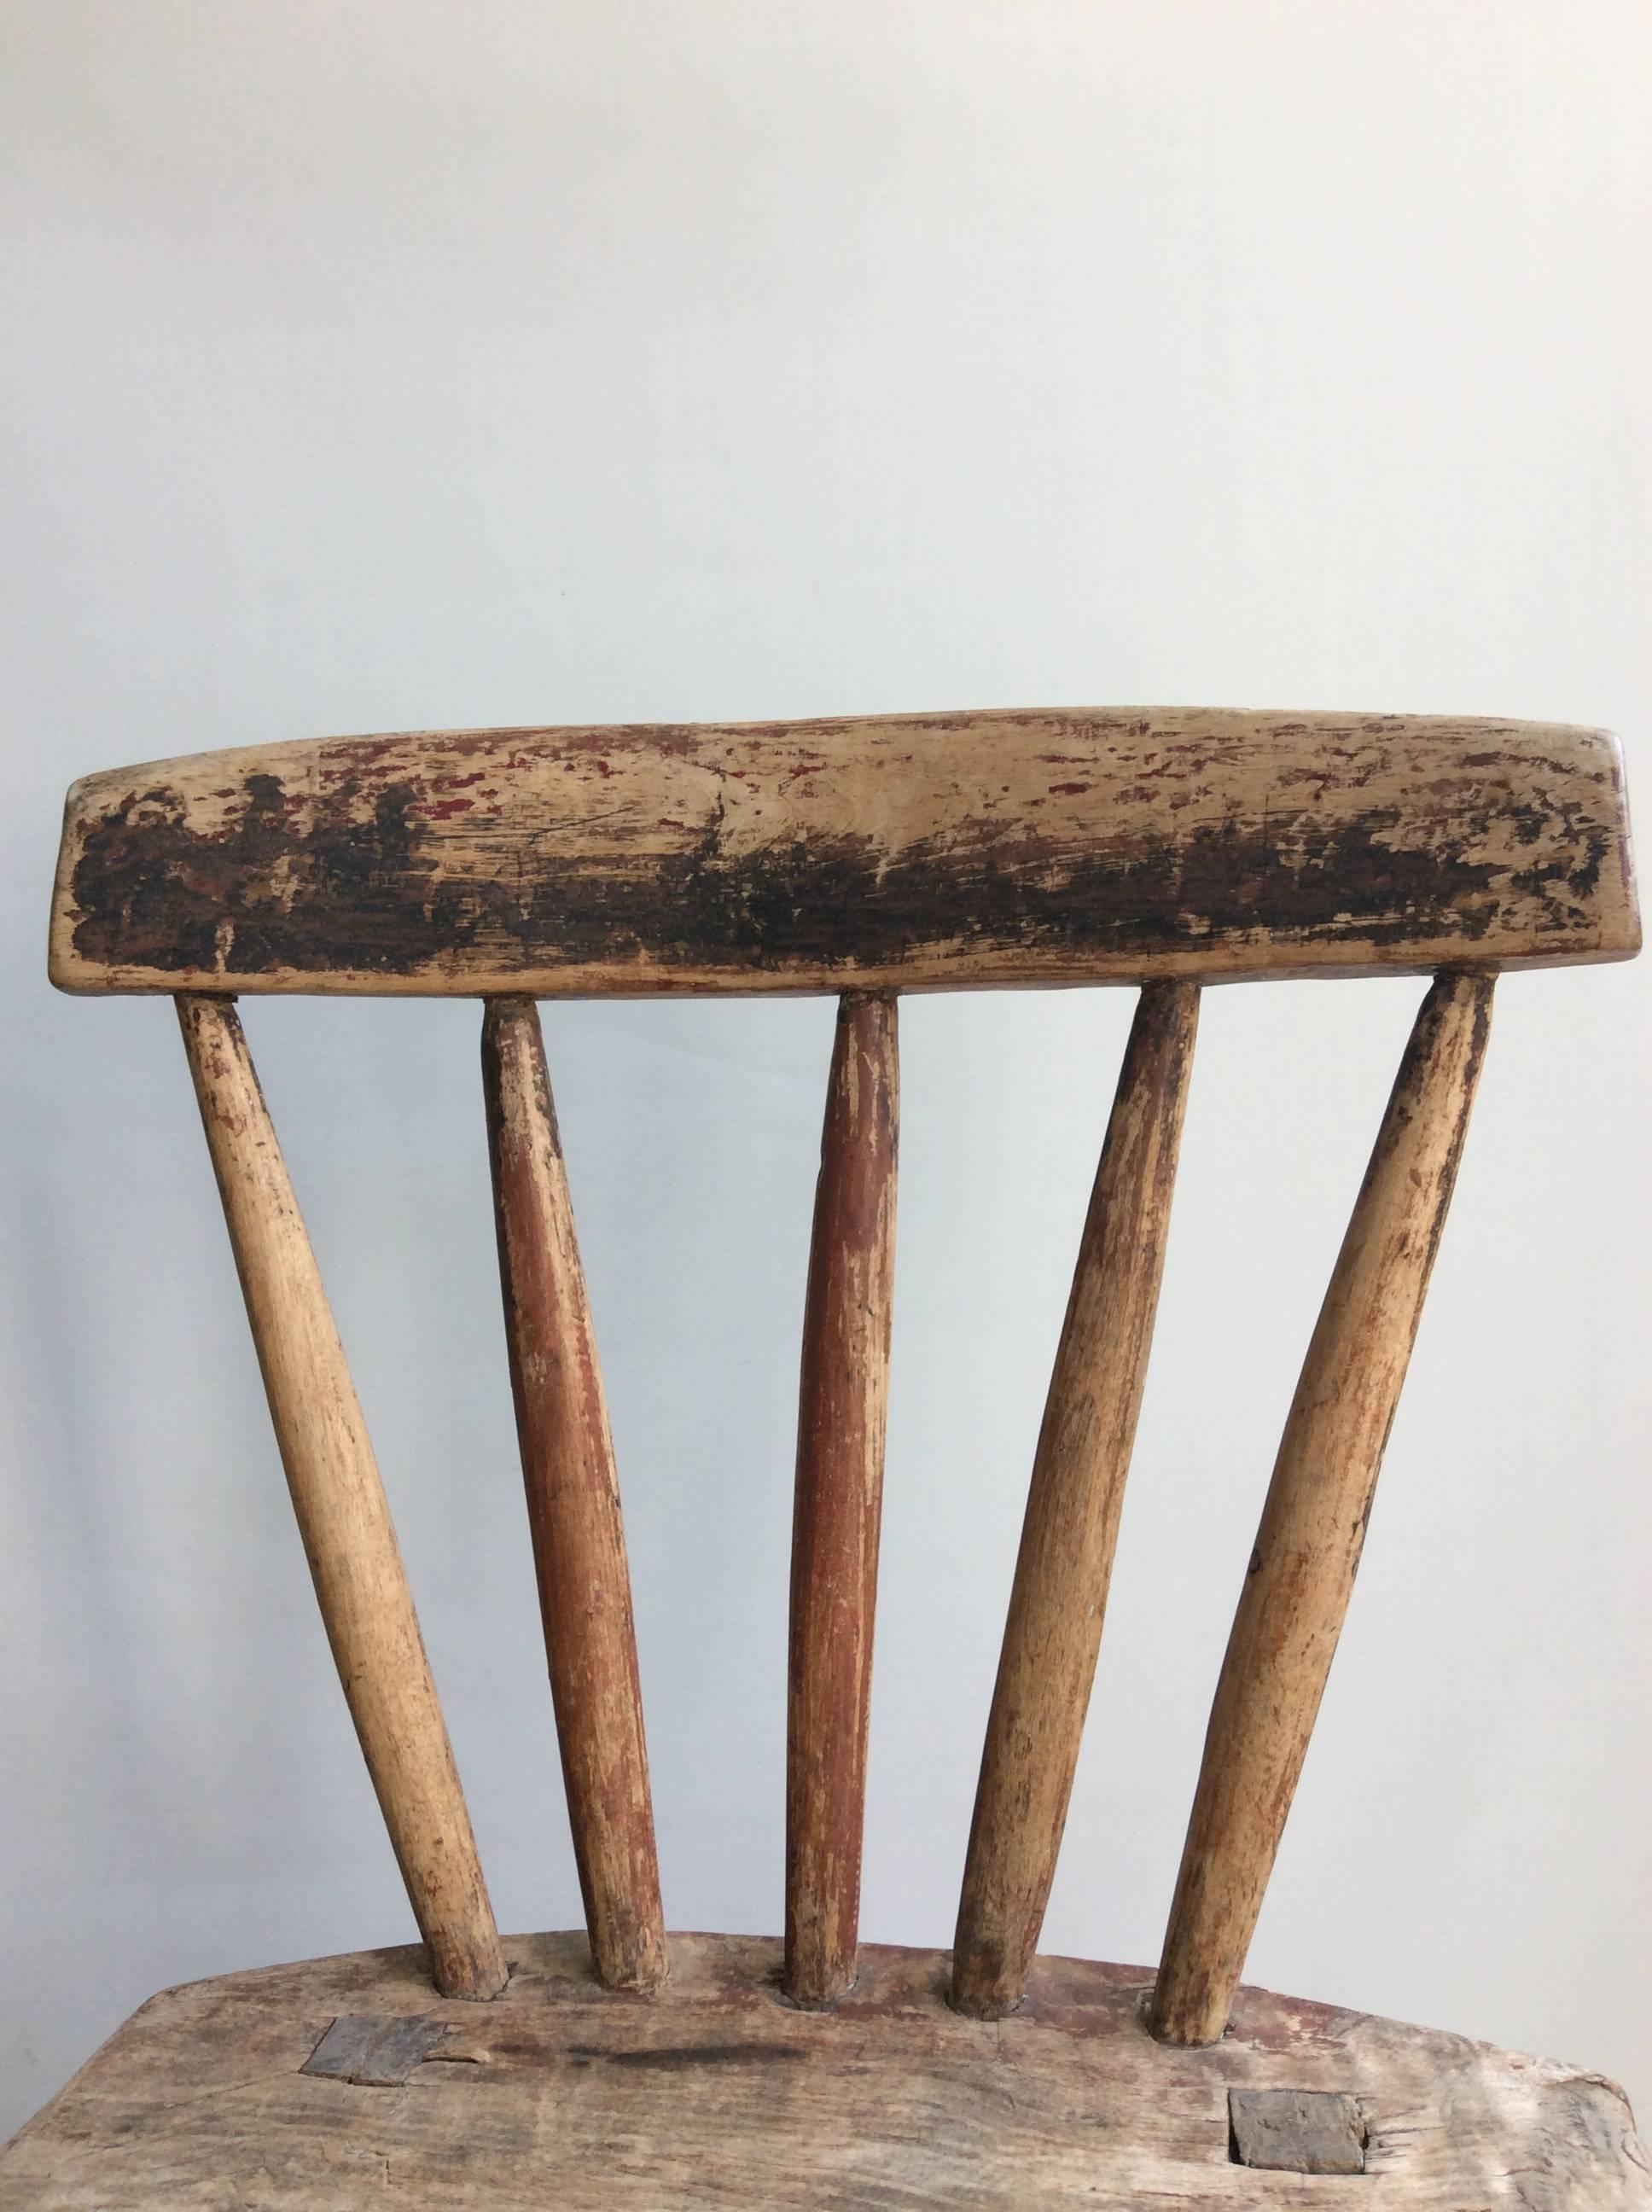 Primitive Swedish Wooden Chair from Dalarna In Fair Condition For Sale In West Sussex, GB